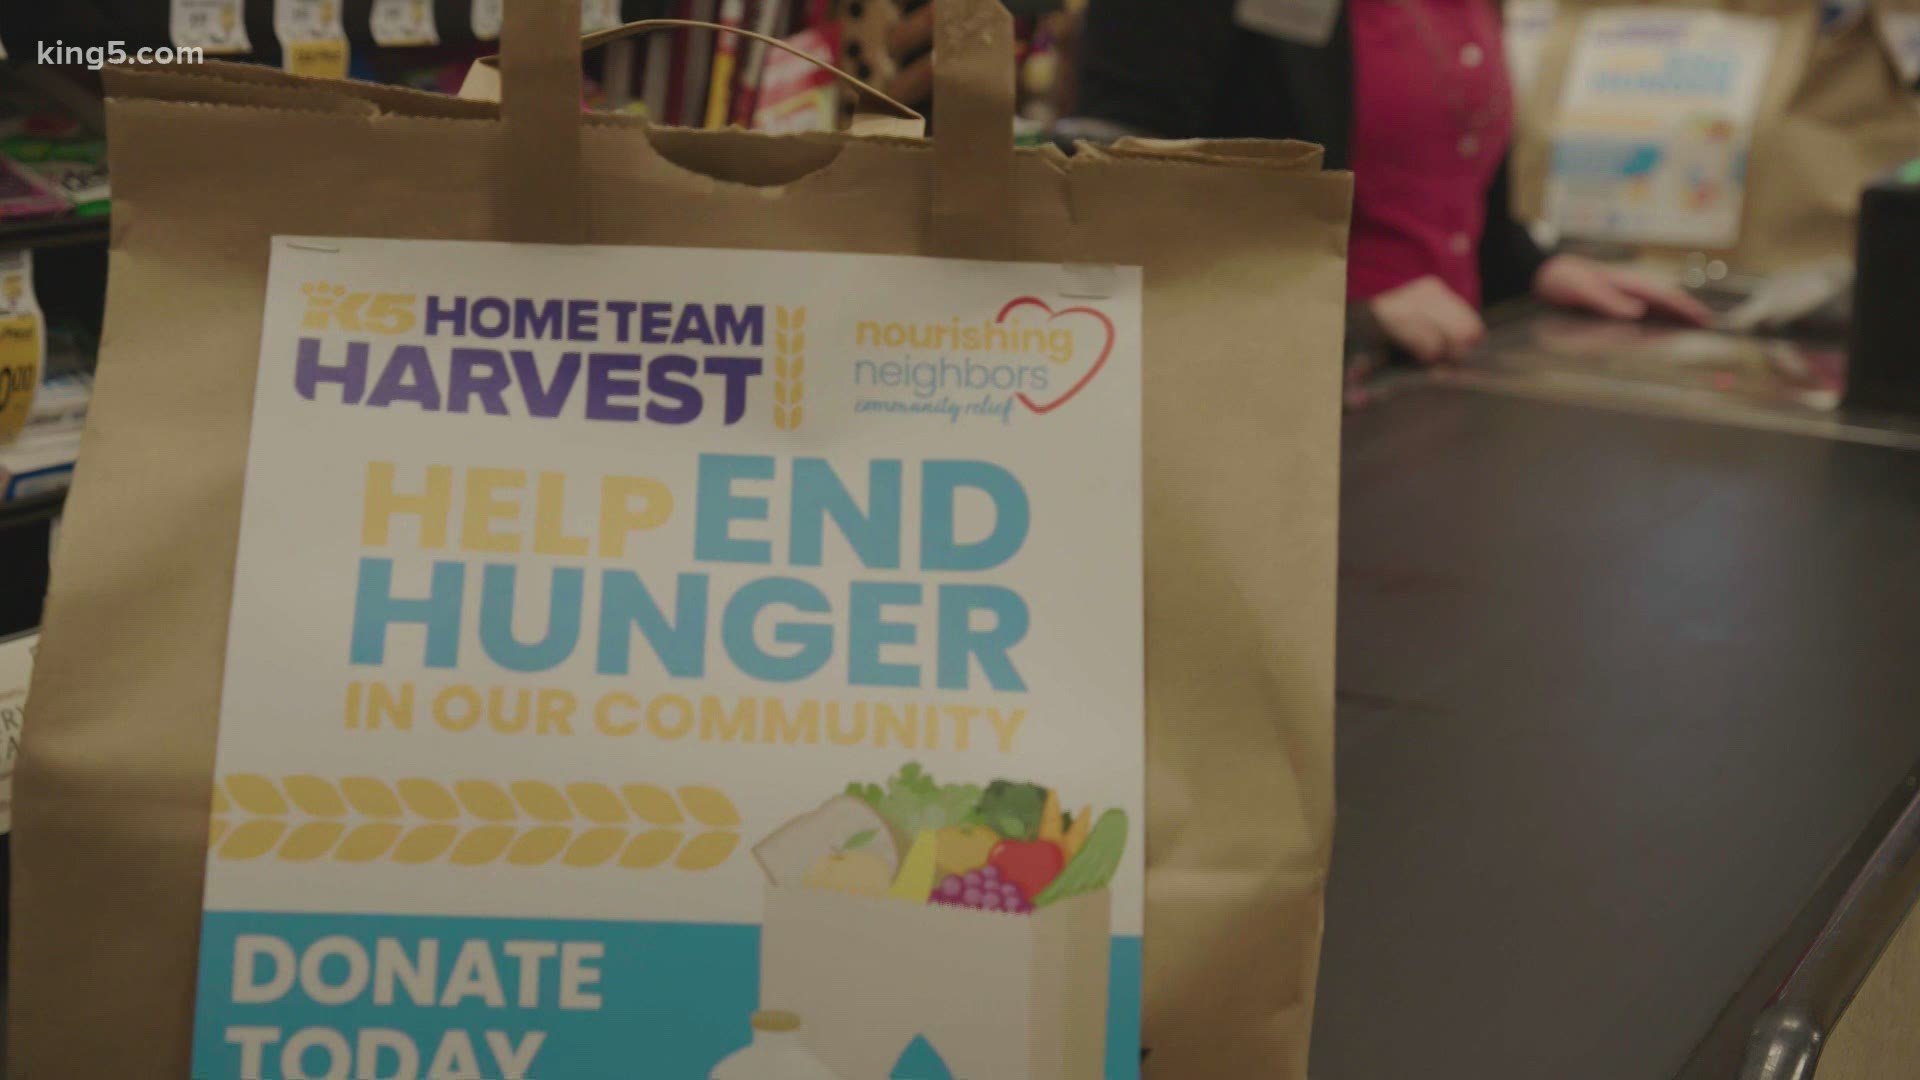 You can buy a Virtual Hunger Bag for $5, $10 or $12 at your Safeway or Albertsons. Donations will be distributed to Northwest Harvest and other hunger programs.